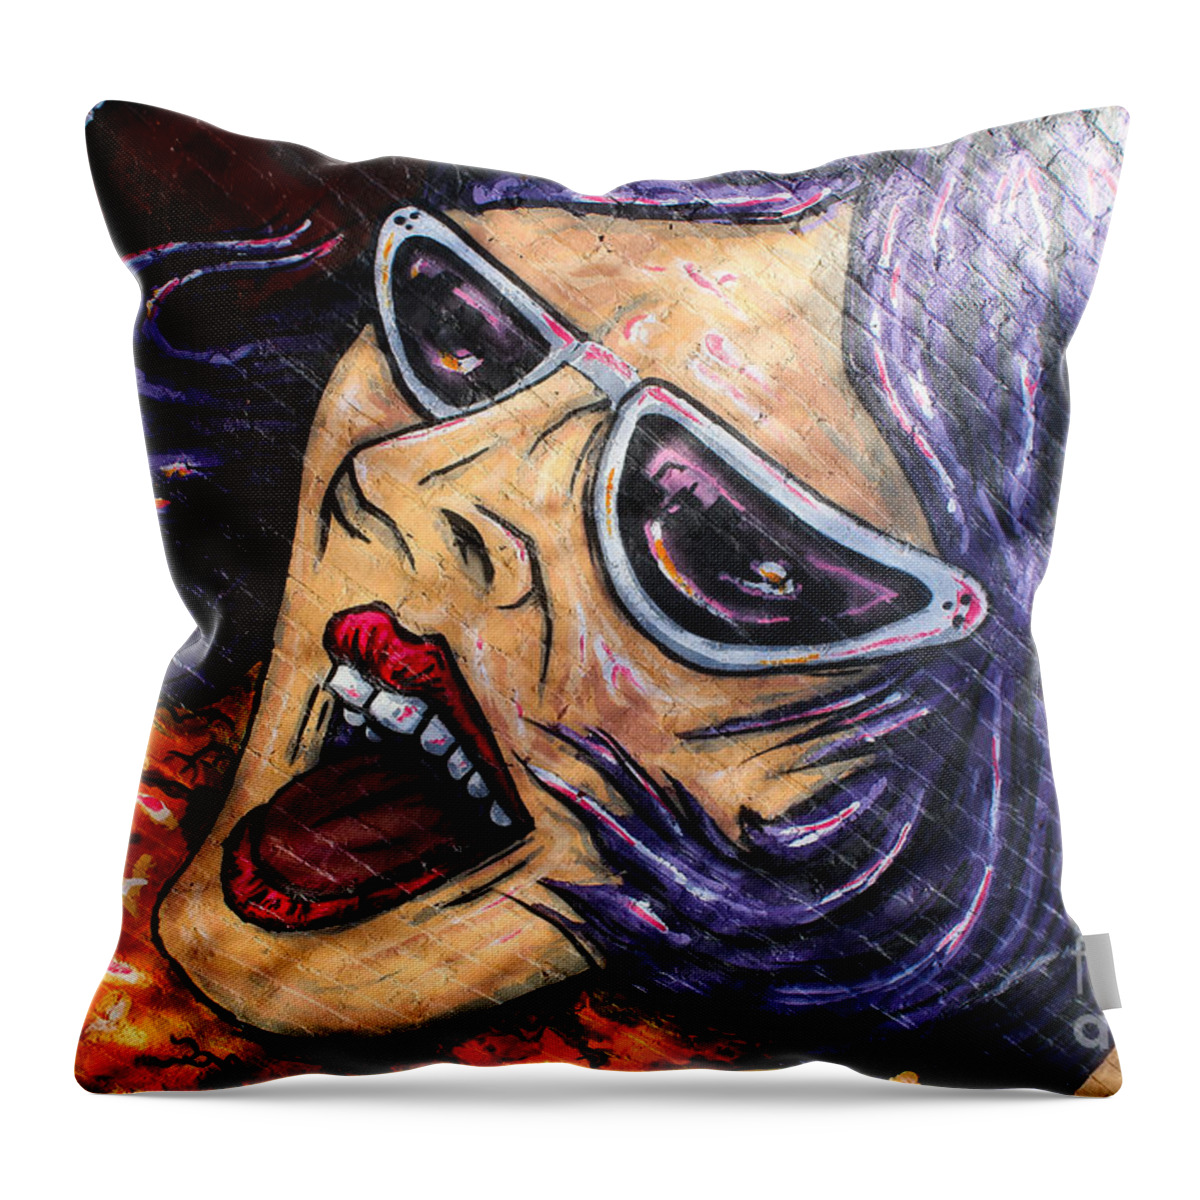 Street Art Throw Pillow featuring the photograph Passion-8 by Phil Cappiali Jr